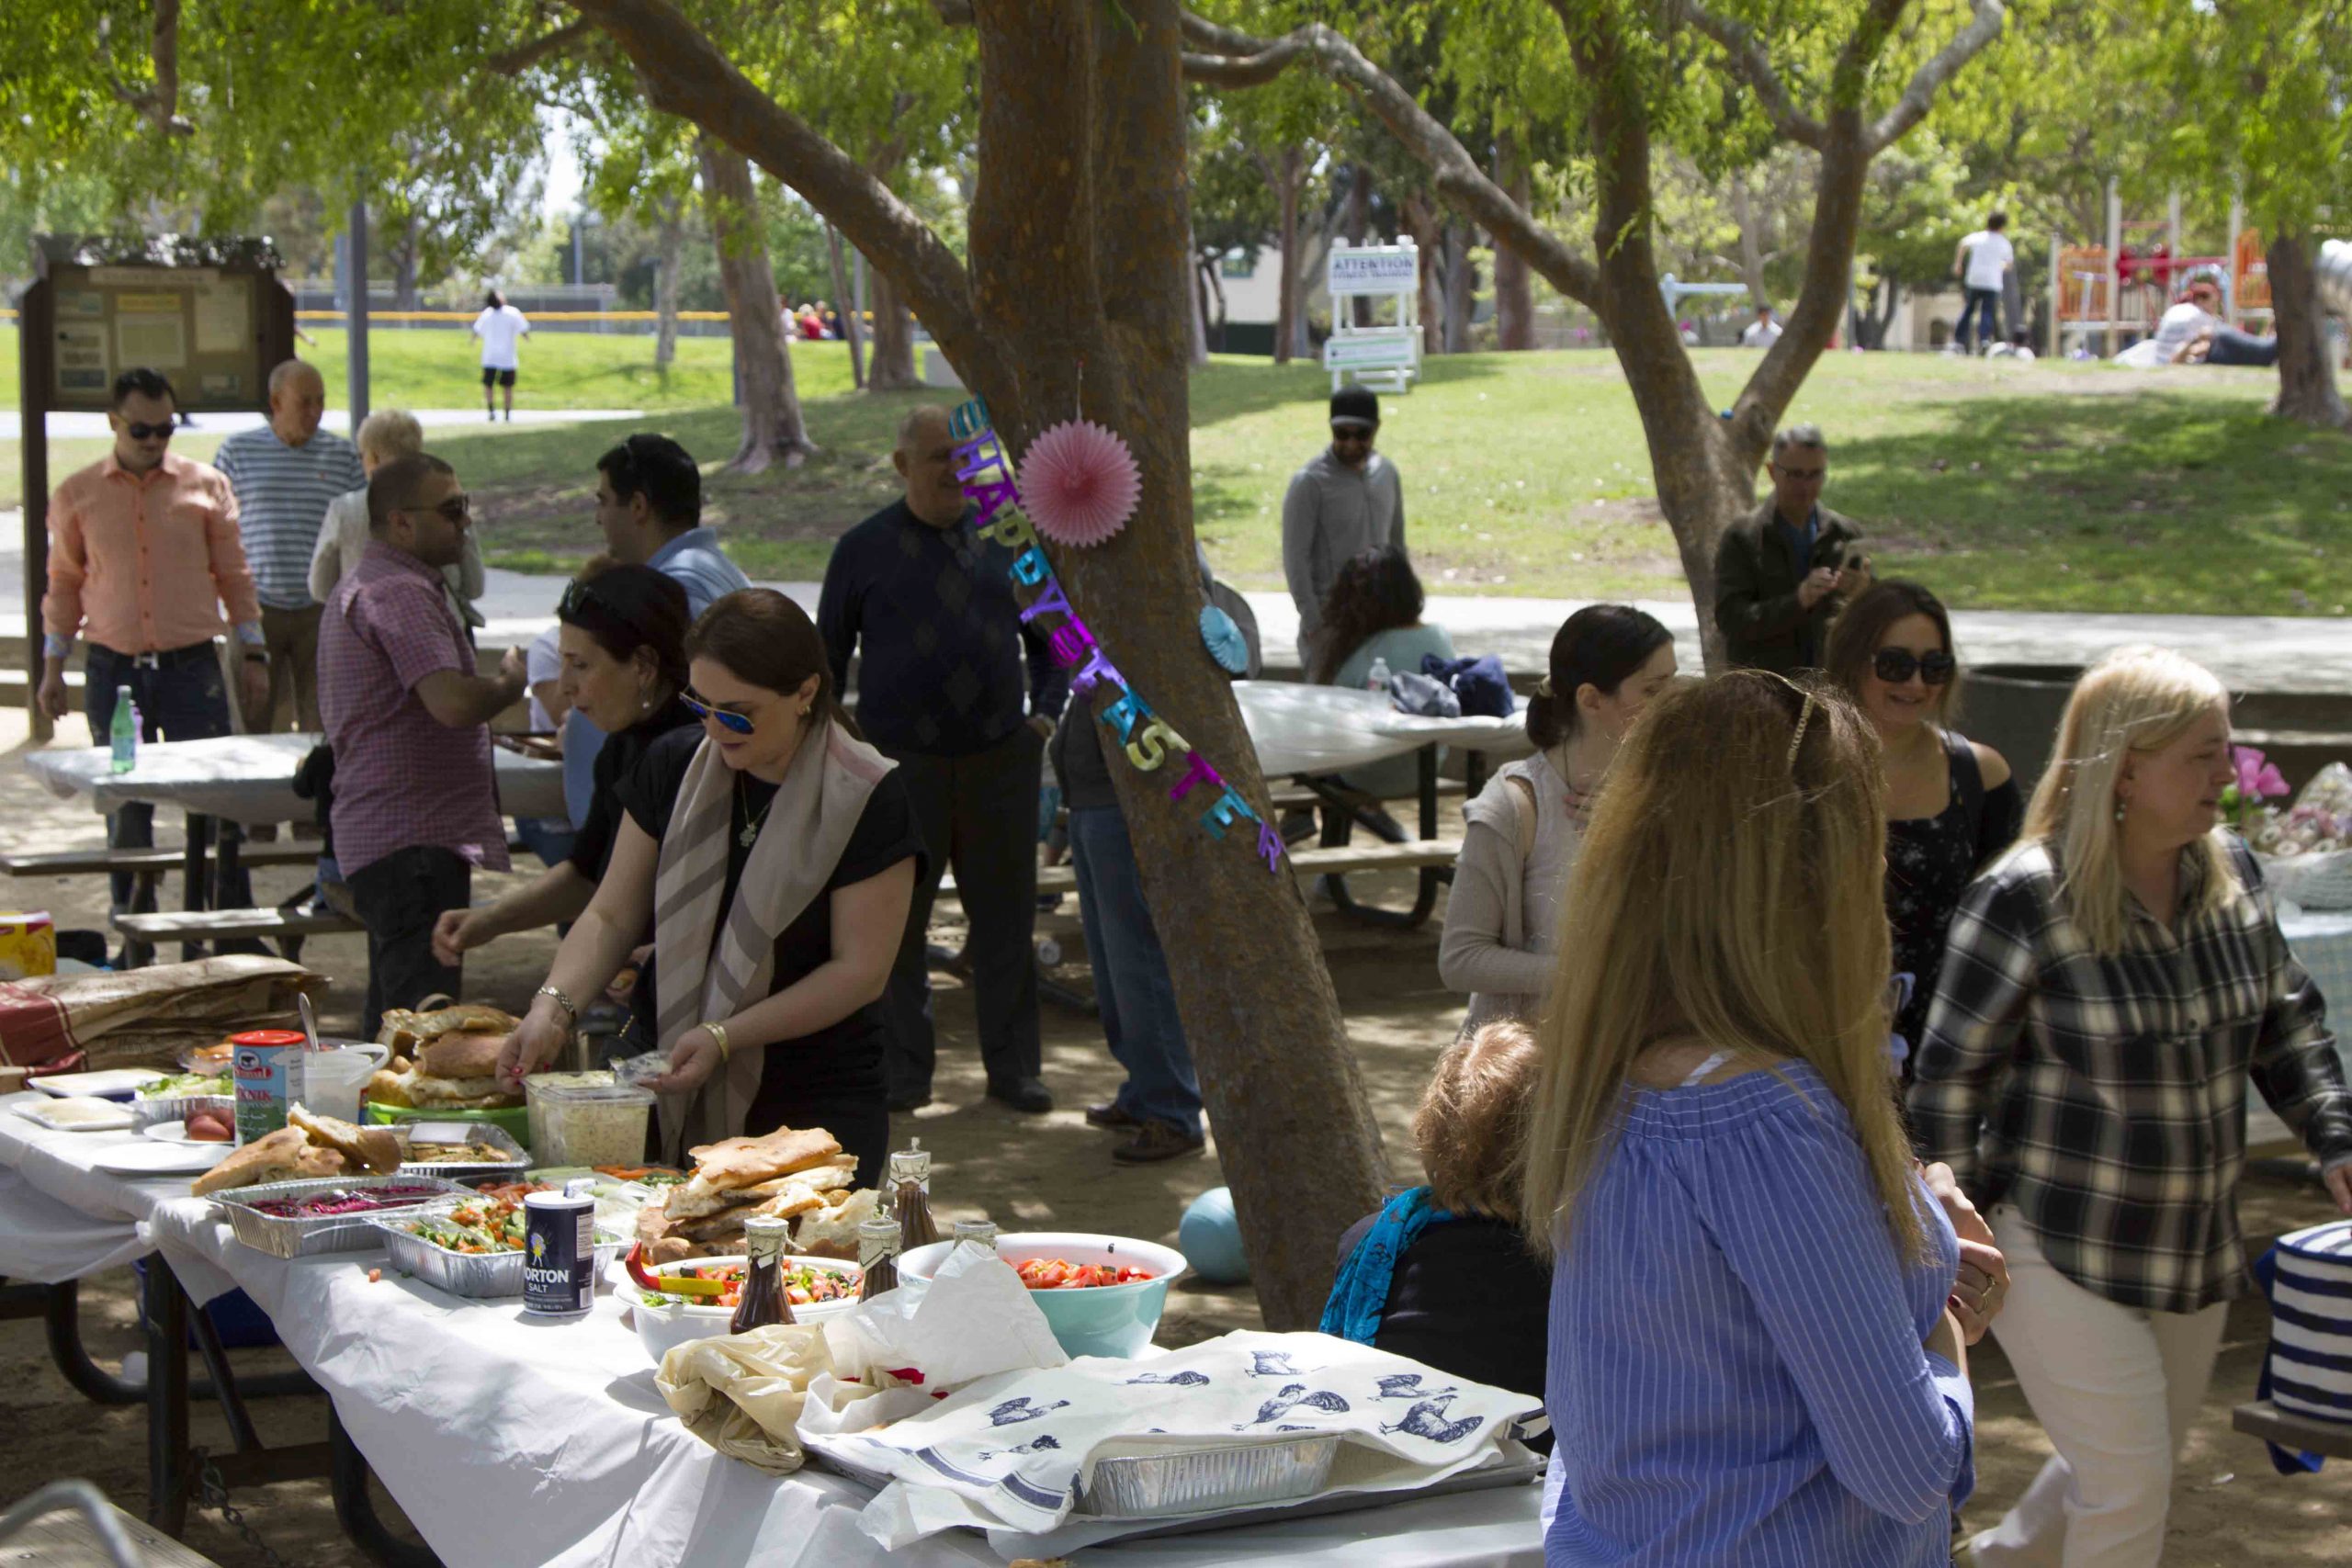 Our First Event, Easter Picnic, Was a Major Success